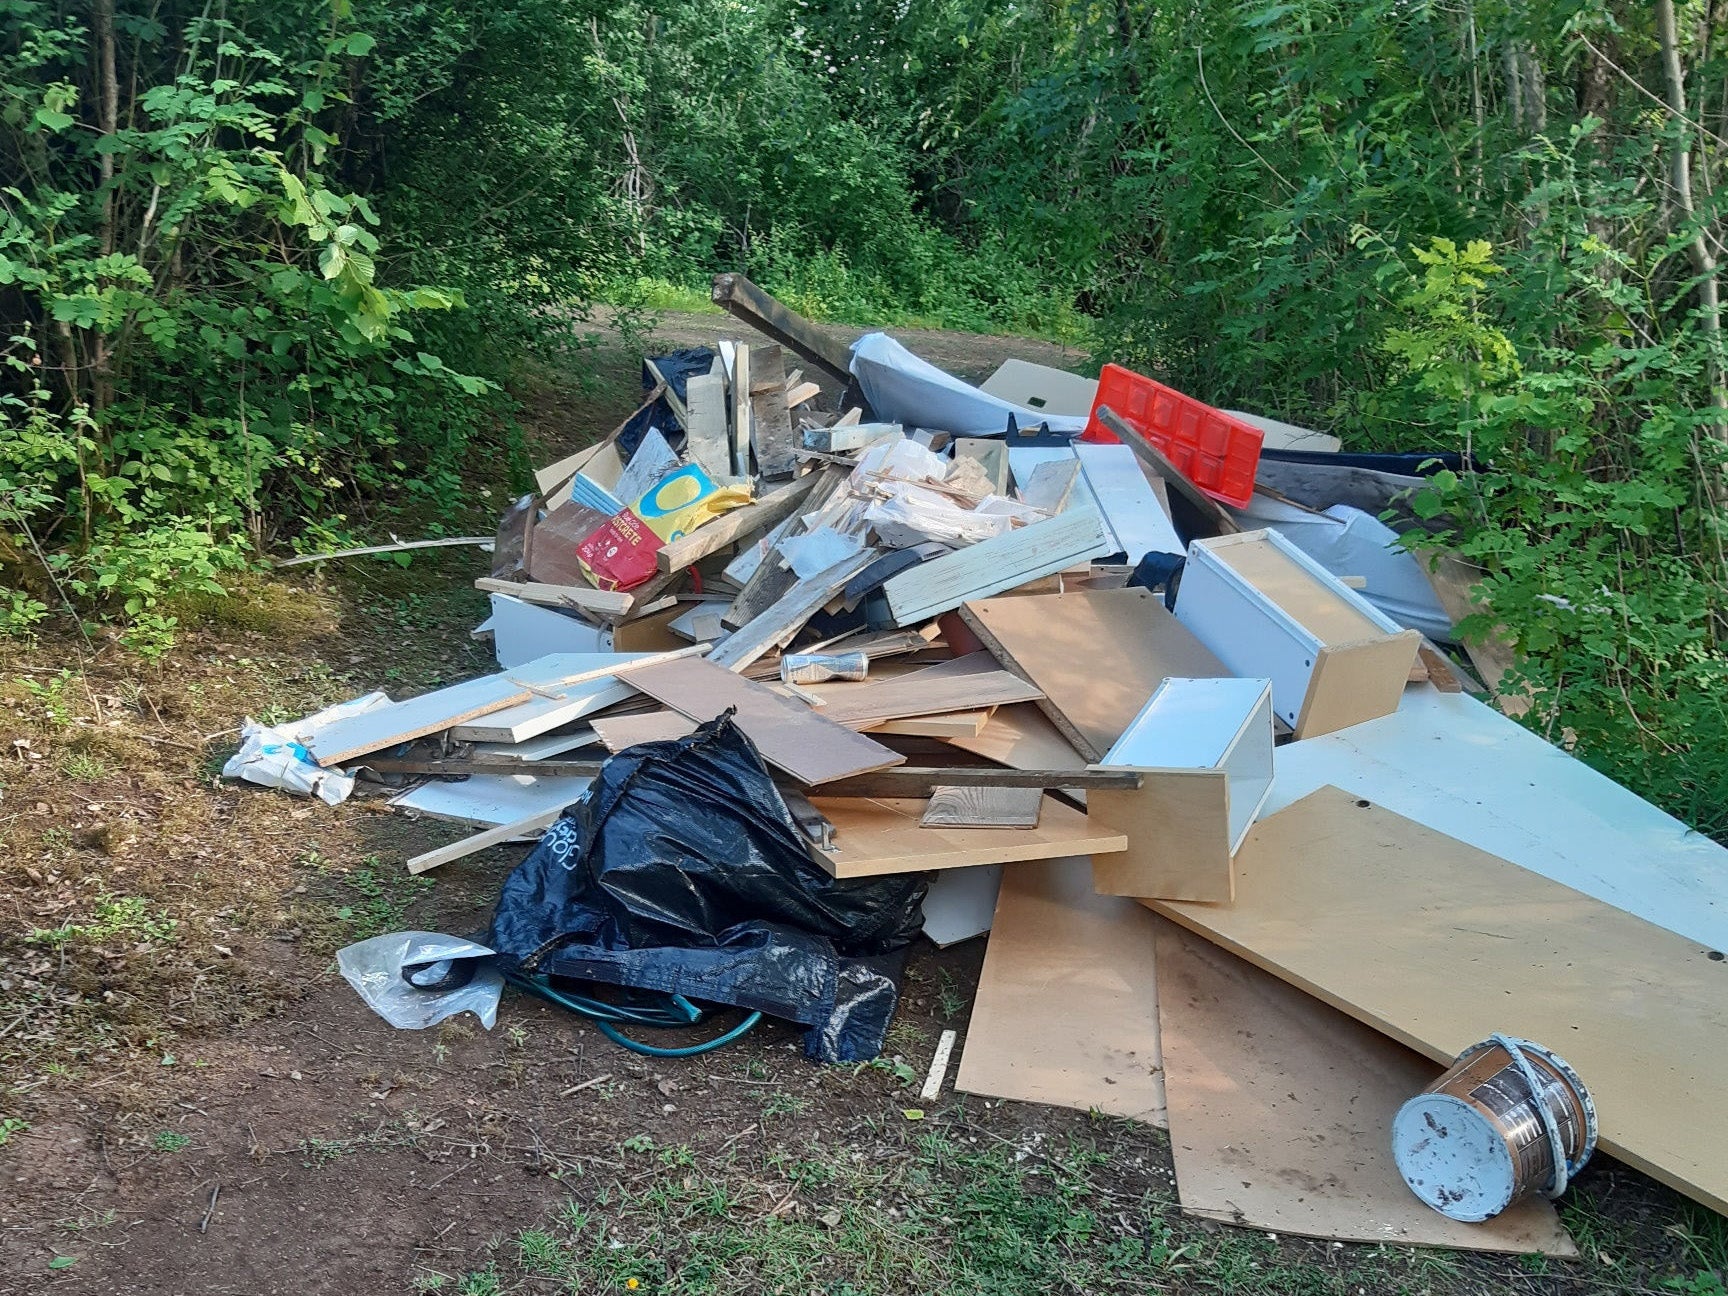 Fly-tipped debris in Barber Wood in Gloucester